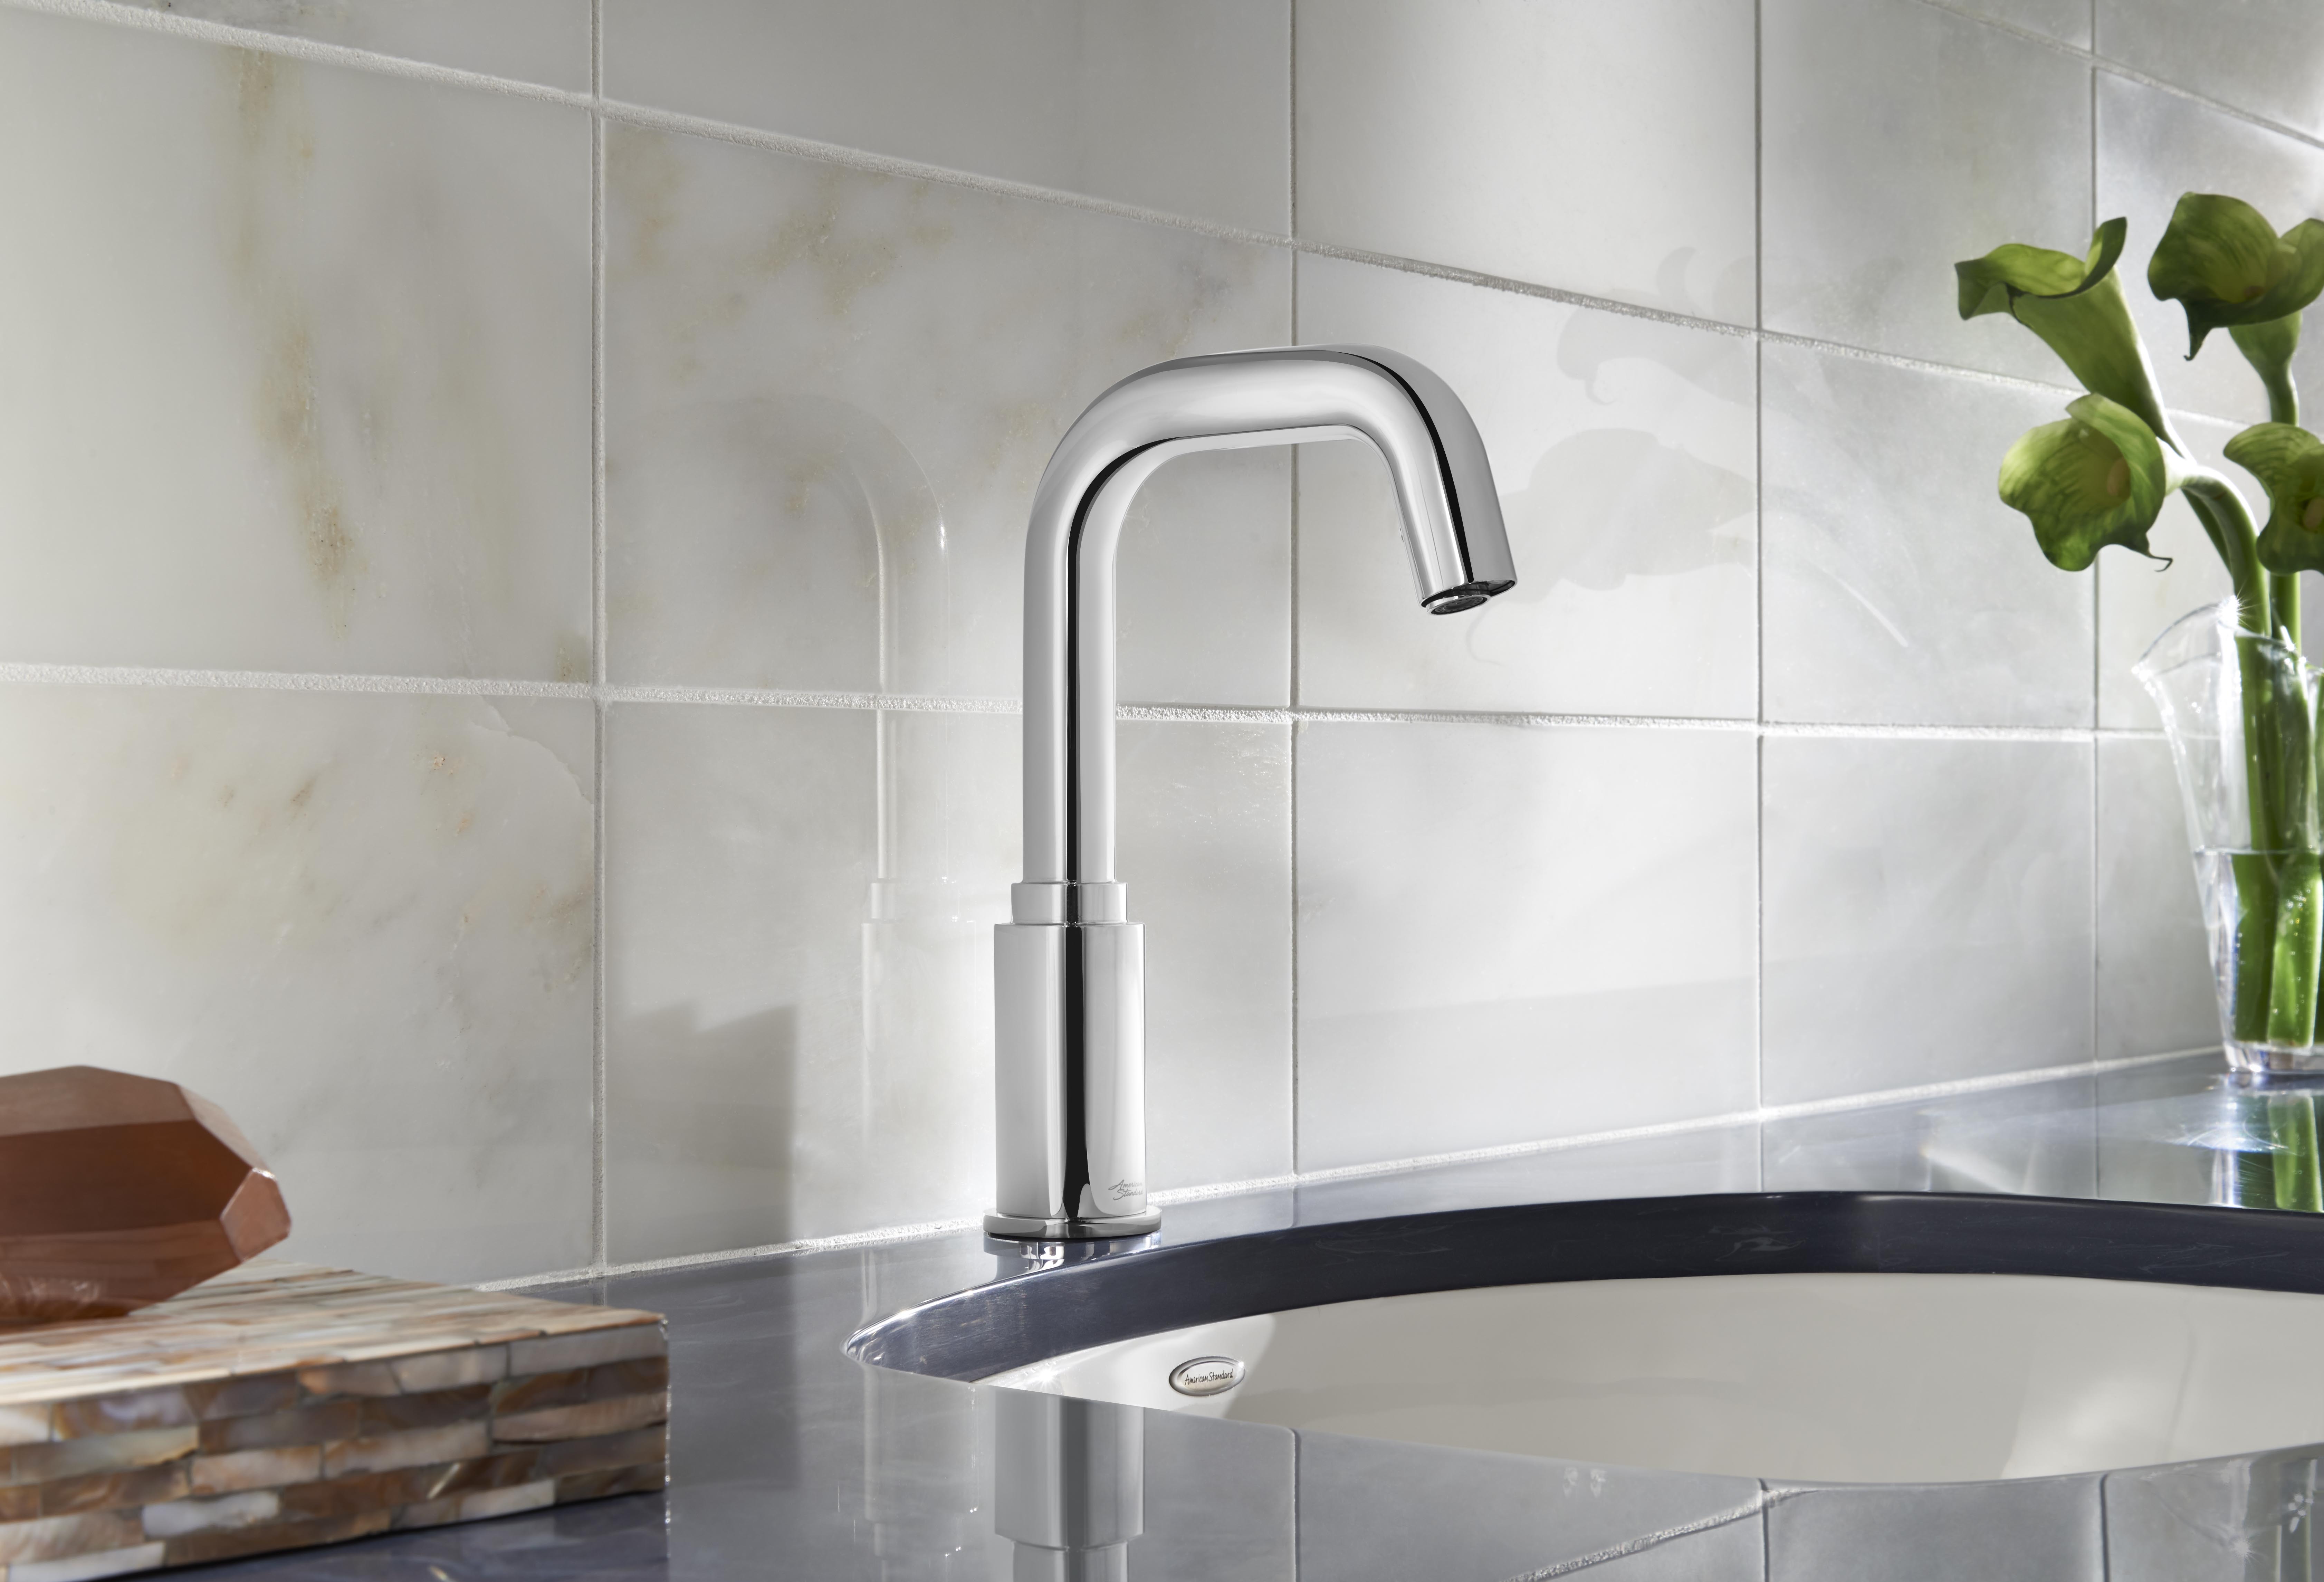 Serin™ Touchless Faucet, Base Model, 0.5 gpm/1.9 Lpm